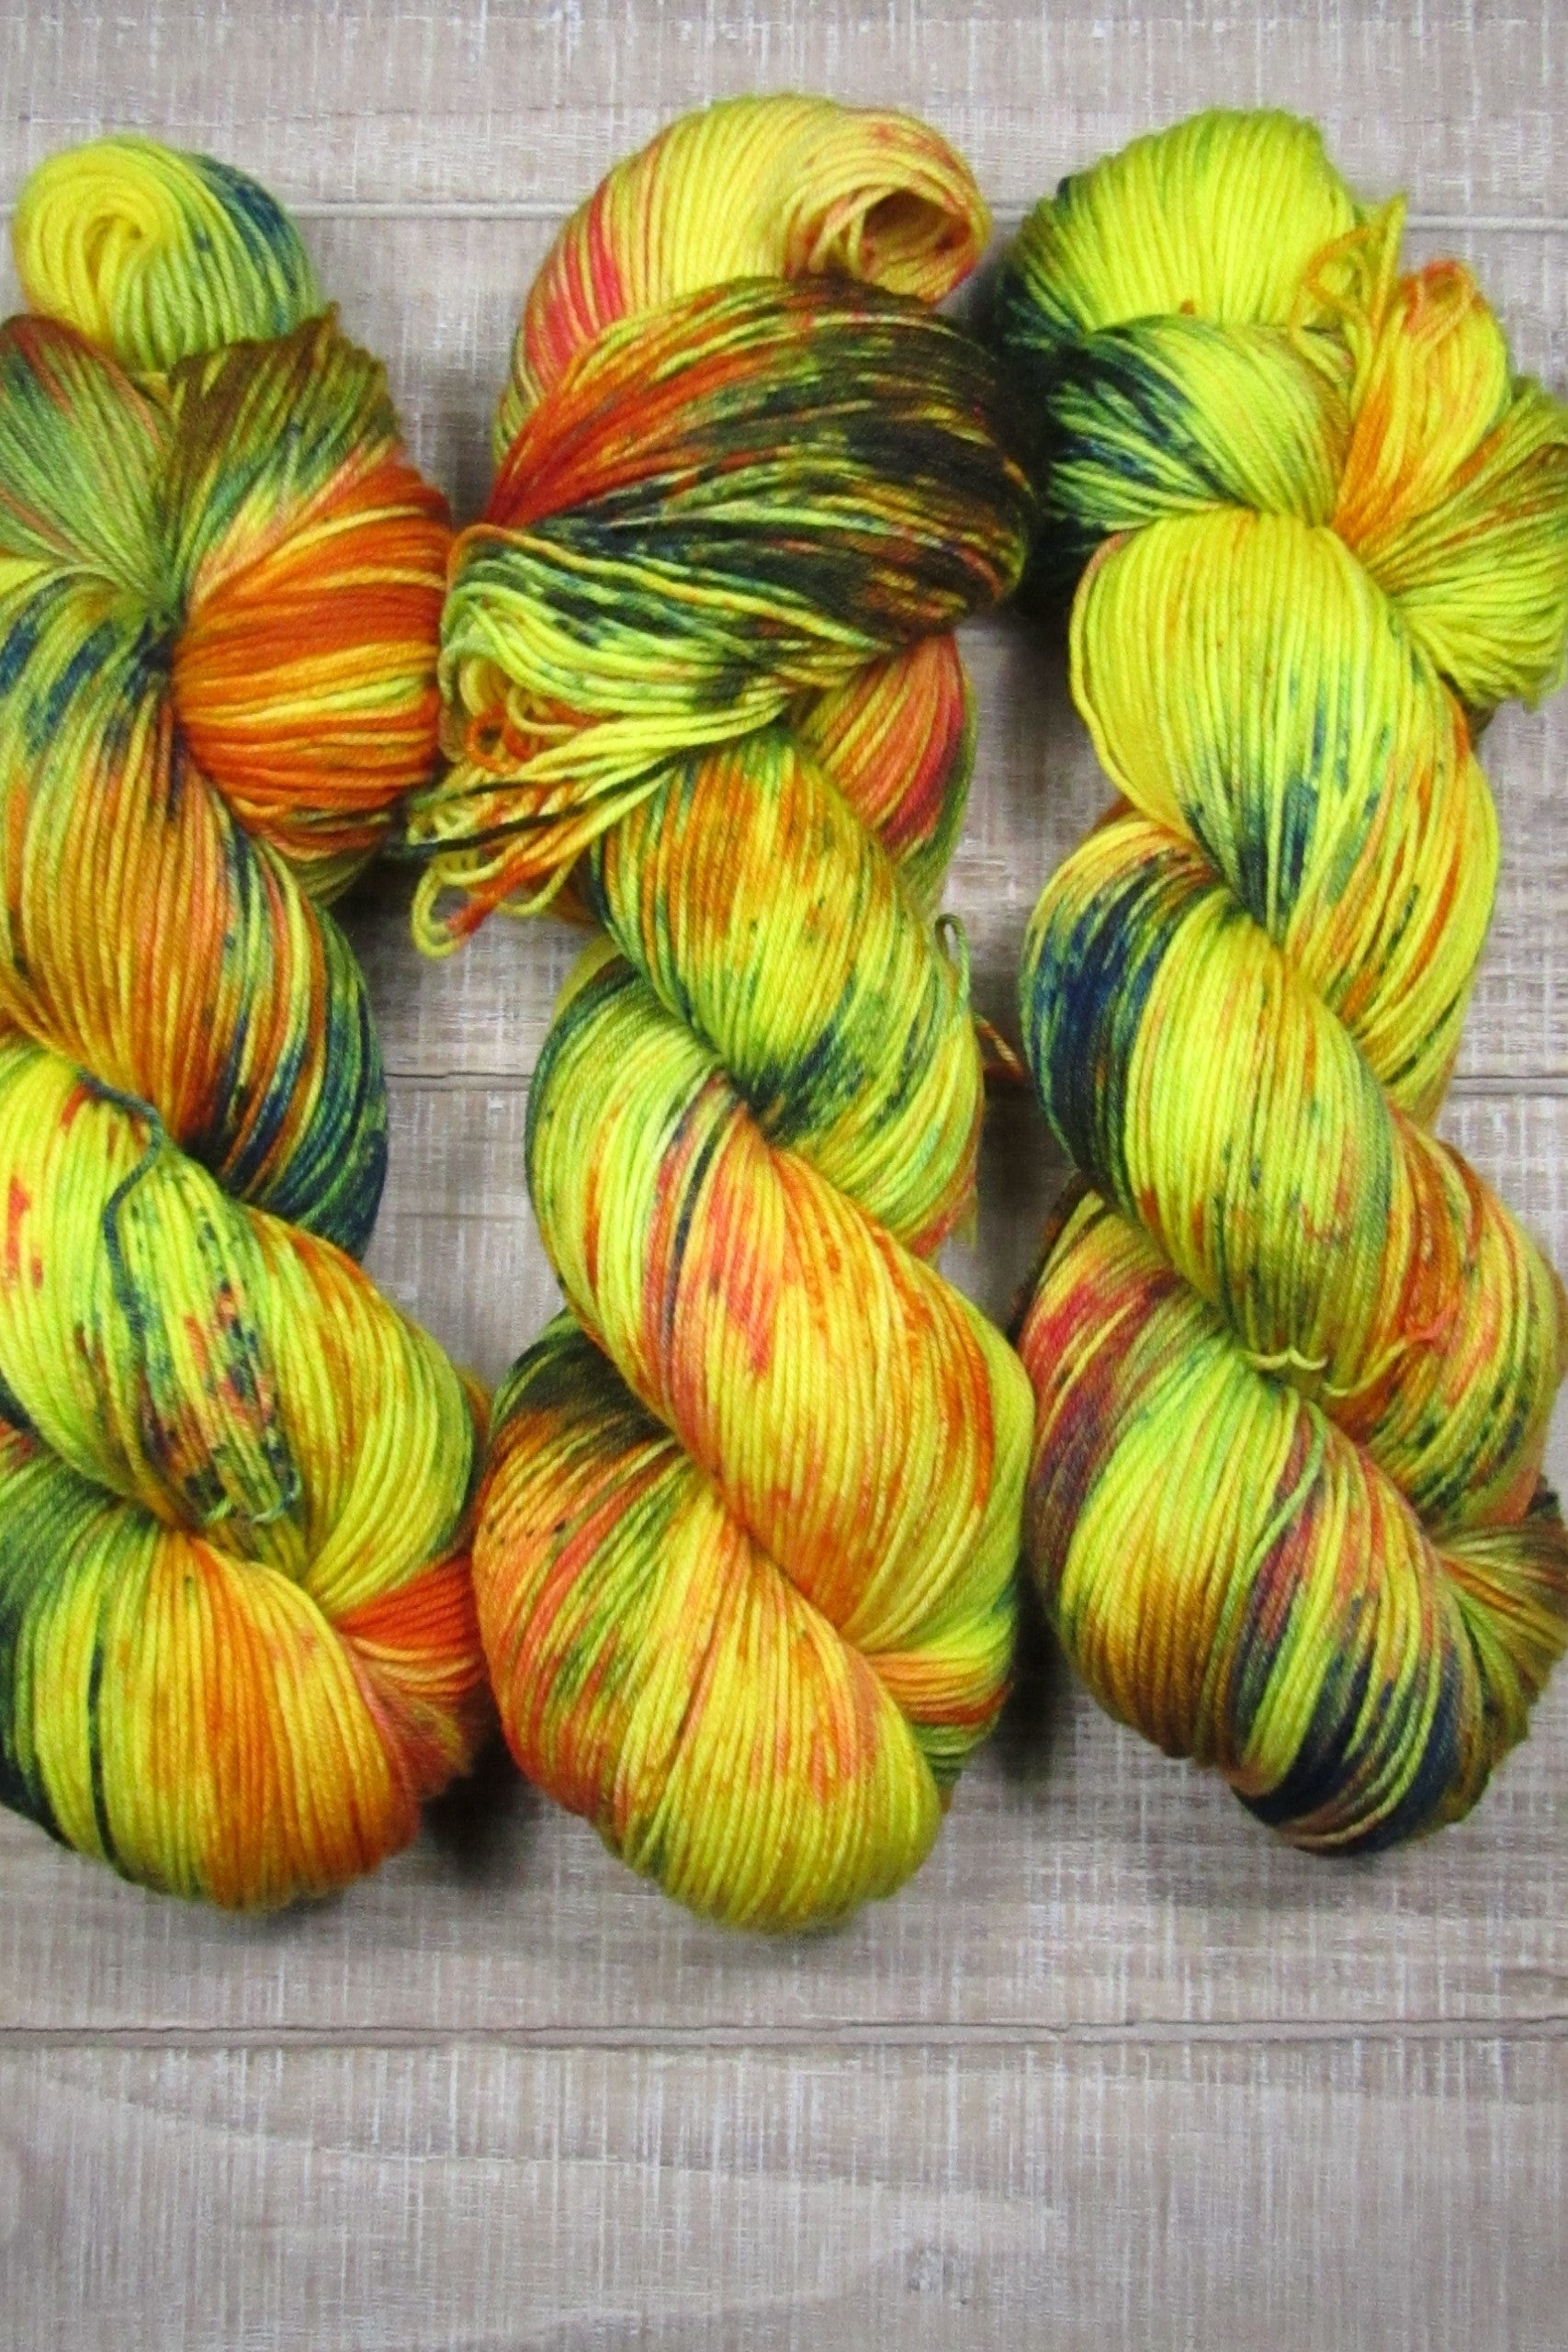 Hand-Dyed Yarn Sunny Superwash Merino/Nylon is a color of golden yellow with areas of orange, red, green, blue, and brown.